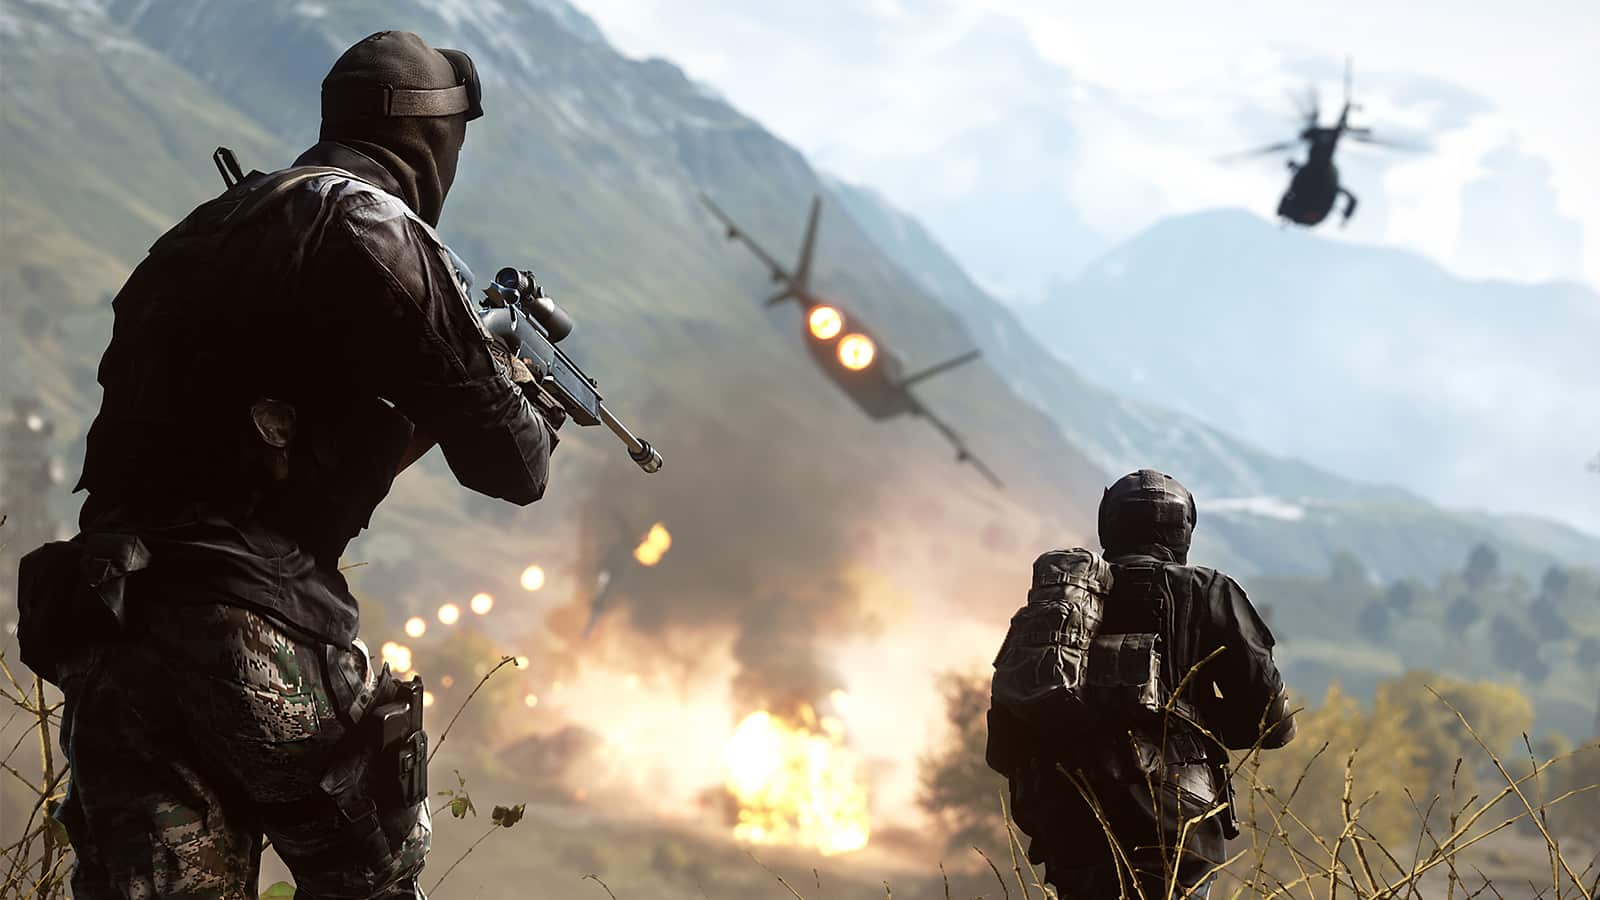 Does anyone still play Battlefield 4 in India? If yes, then how